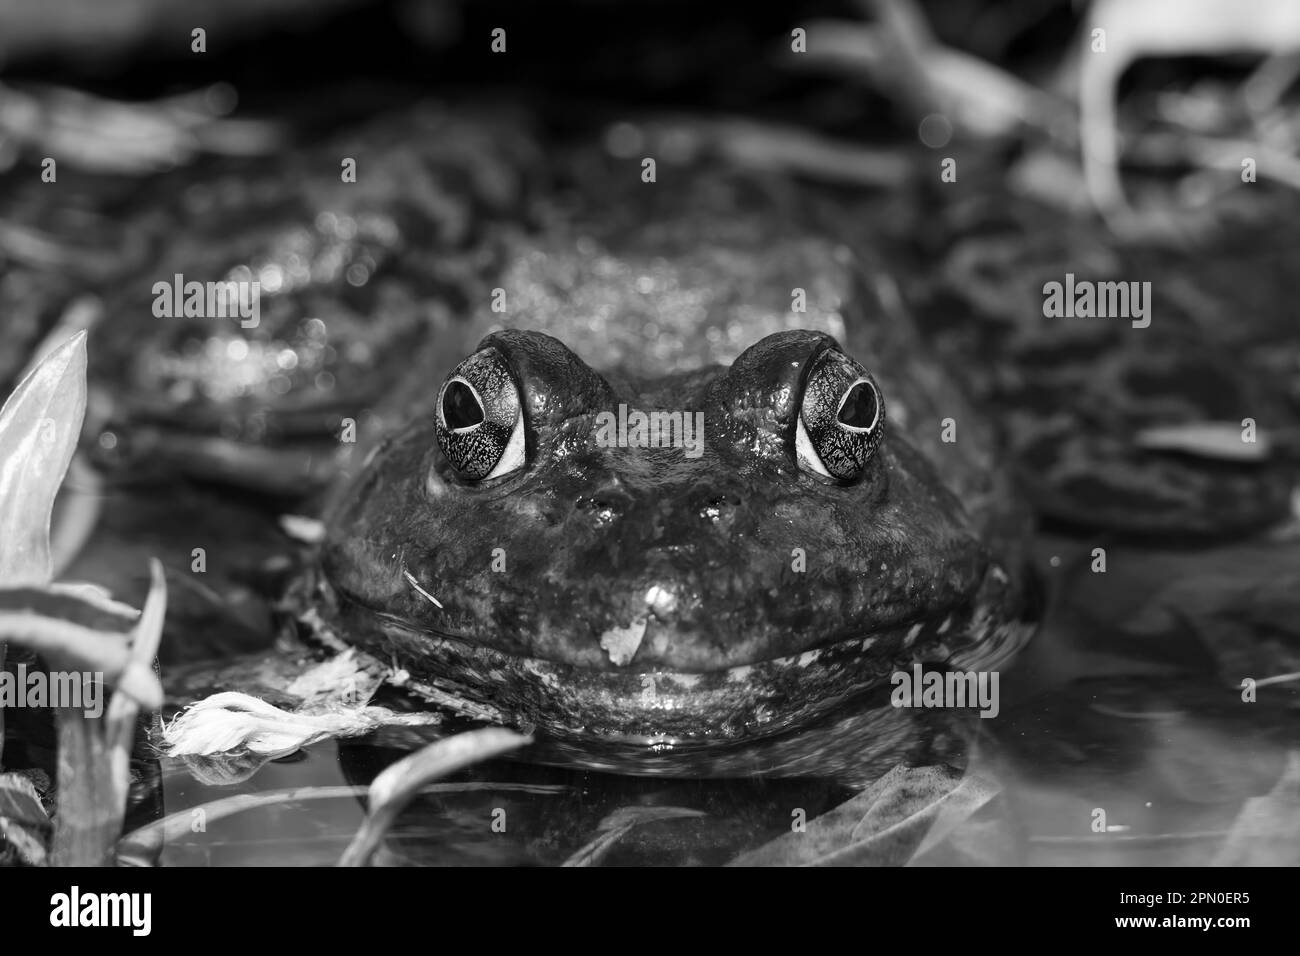 Portrait of an American bullfrog in black and white. It is an amphibious frog, and a member of the family Ranidae, or true frogs. Stock Photo